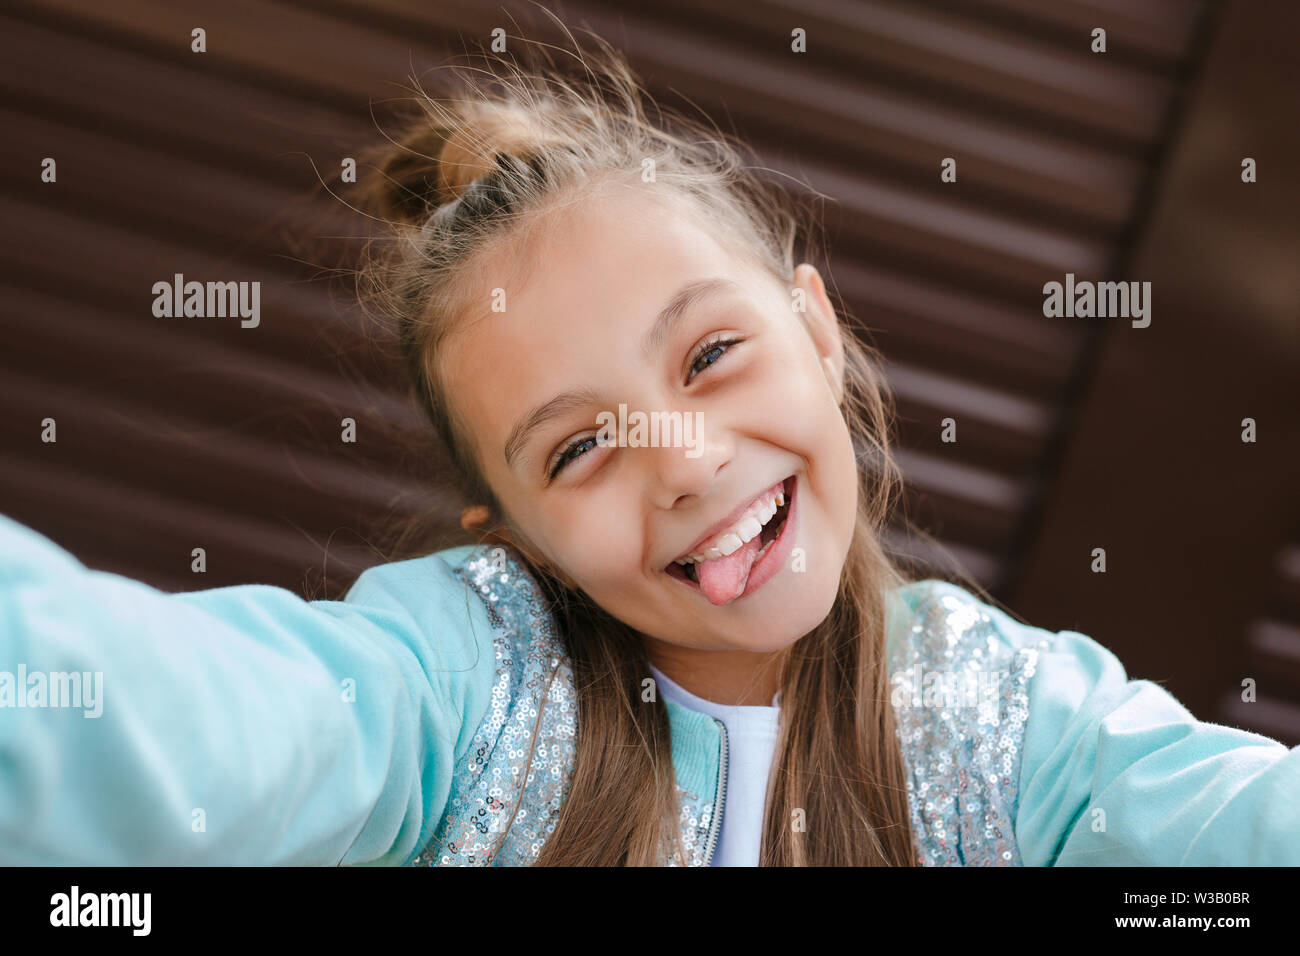 Cute Little Girl Taking A Selfie With A Mobile Phone Outdoor Stock Photo Alamy